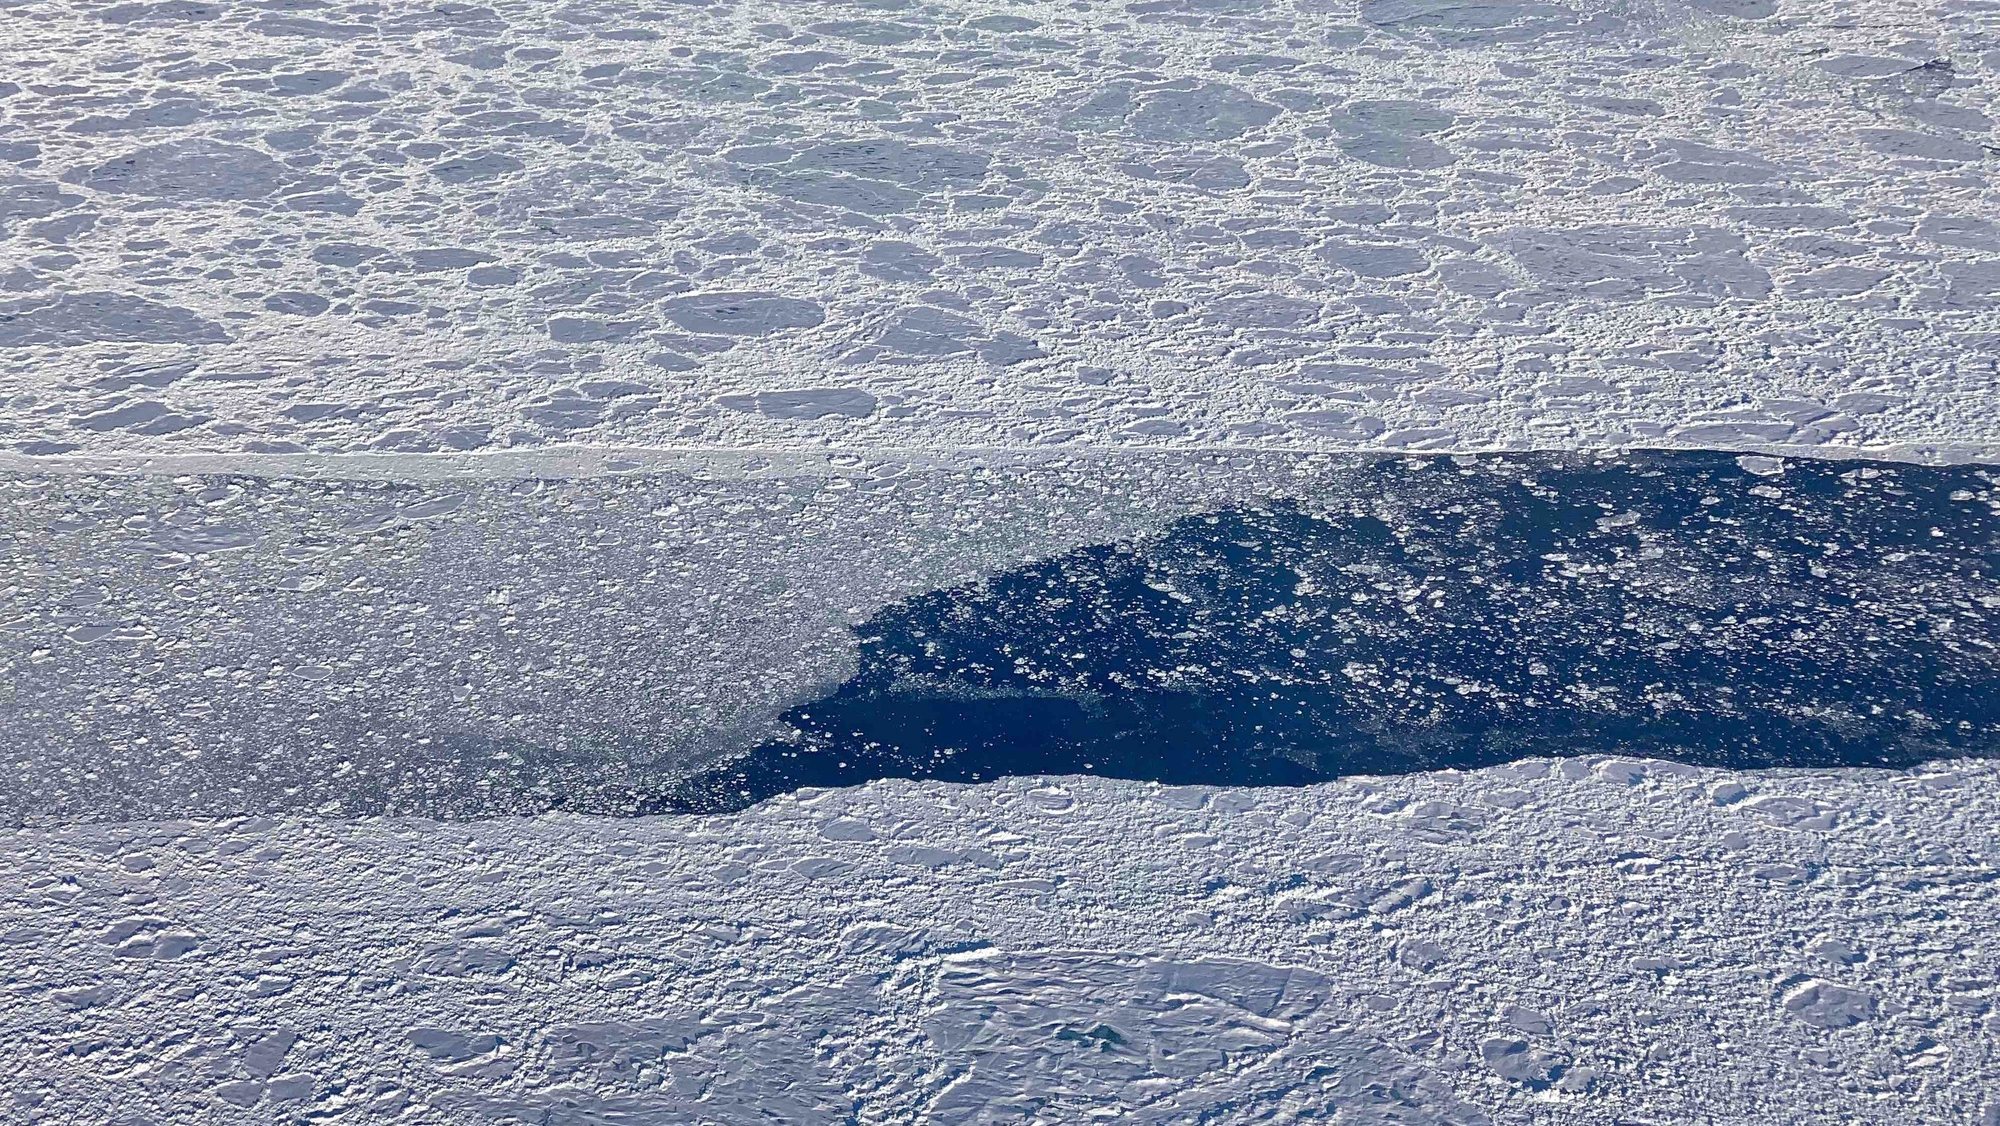 epa07867656 A handout photo made available by NASA shows an aerial view taken during an Operation IceBridge flight of an opening in the sea ice cover, partially filled in by much smaller sea ice rubble and floes, north of Greenland, 09 September 2019 (issued 25 September 2019). Arctic sea ice likely reached its 2019 minimum extent on 18 September 2019. At 4.15 million square kilometers this year&#039;s summertime extent is effectively tied for the second in the satellite record, according to NASA and the National Snow and Ice Data Center. The Arctic sea ice cap is an expanse of frozen seawater floating on top of the Arctic Ocean and neighboring seas. Every year, it expands and thickens during the fall and winter and grows smaller and thinner during the spring and summer. Changes in Arctic sea ice cover have wide-ranging impacts. The sea ice affects local ecosystems, regional and global weather patterns, and the circulation of the oceans.  EPA/NASA/LINETTE BOISVERT HANDOUT  HANDOUT EDITORIAL USE ONLY/NO SALES